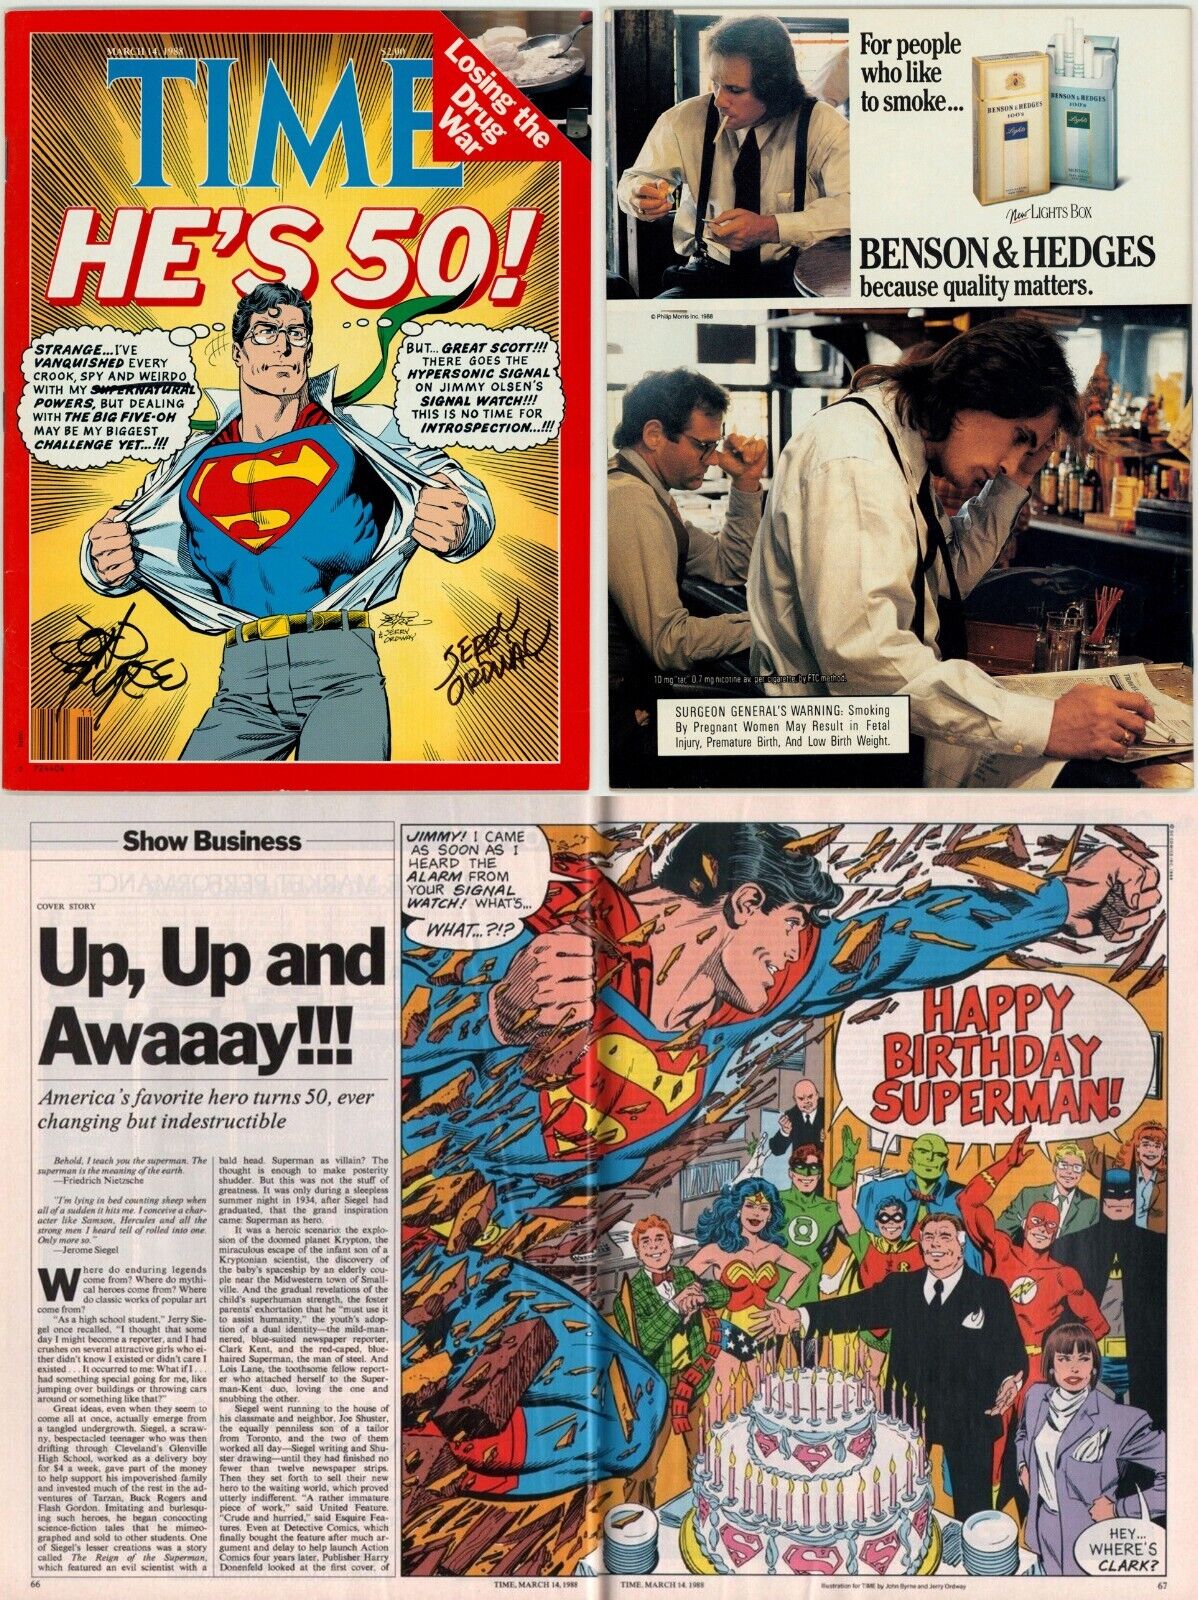 Time Magazine Superman HE'S 50 March 14 1988 SIGNED John Byrne Jerry Ordway Art